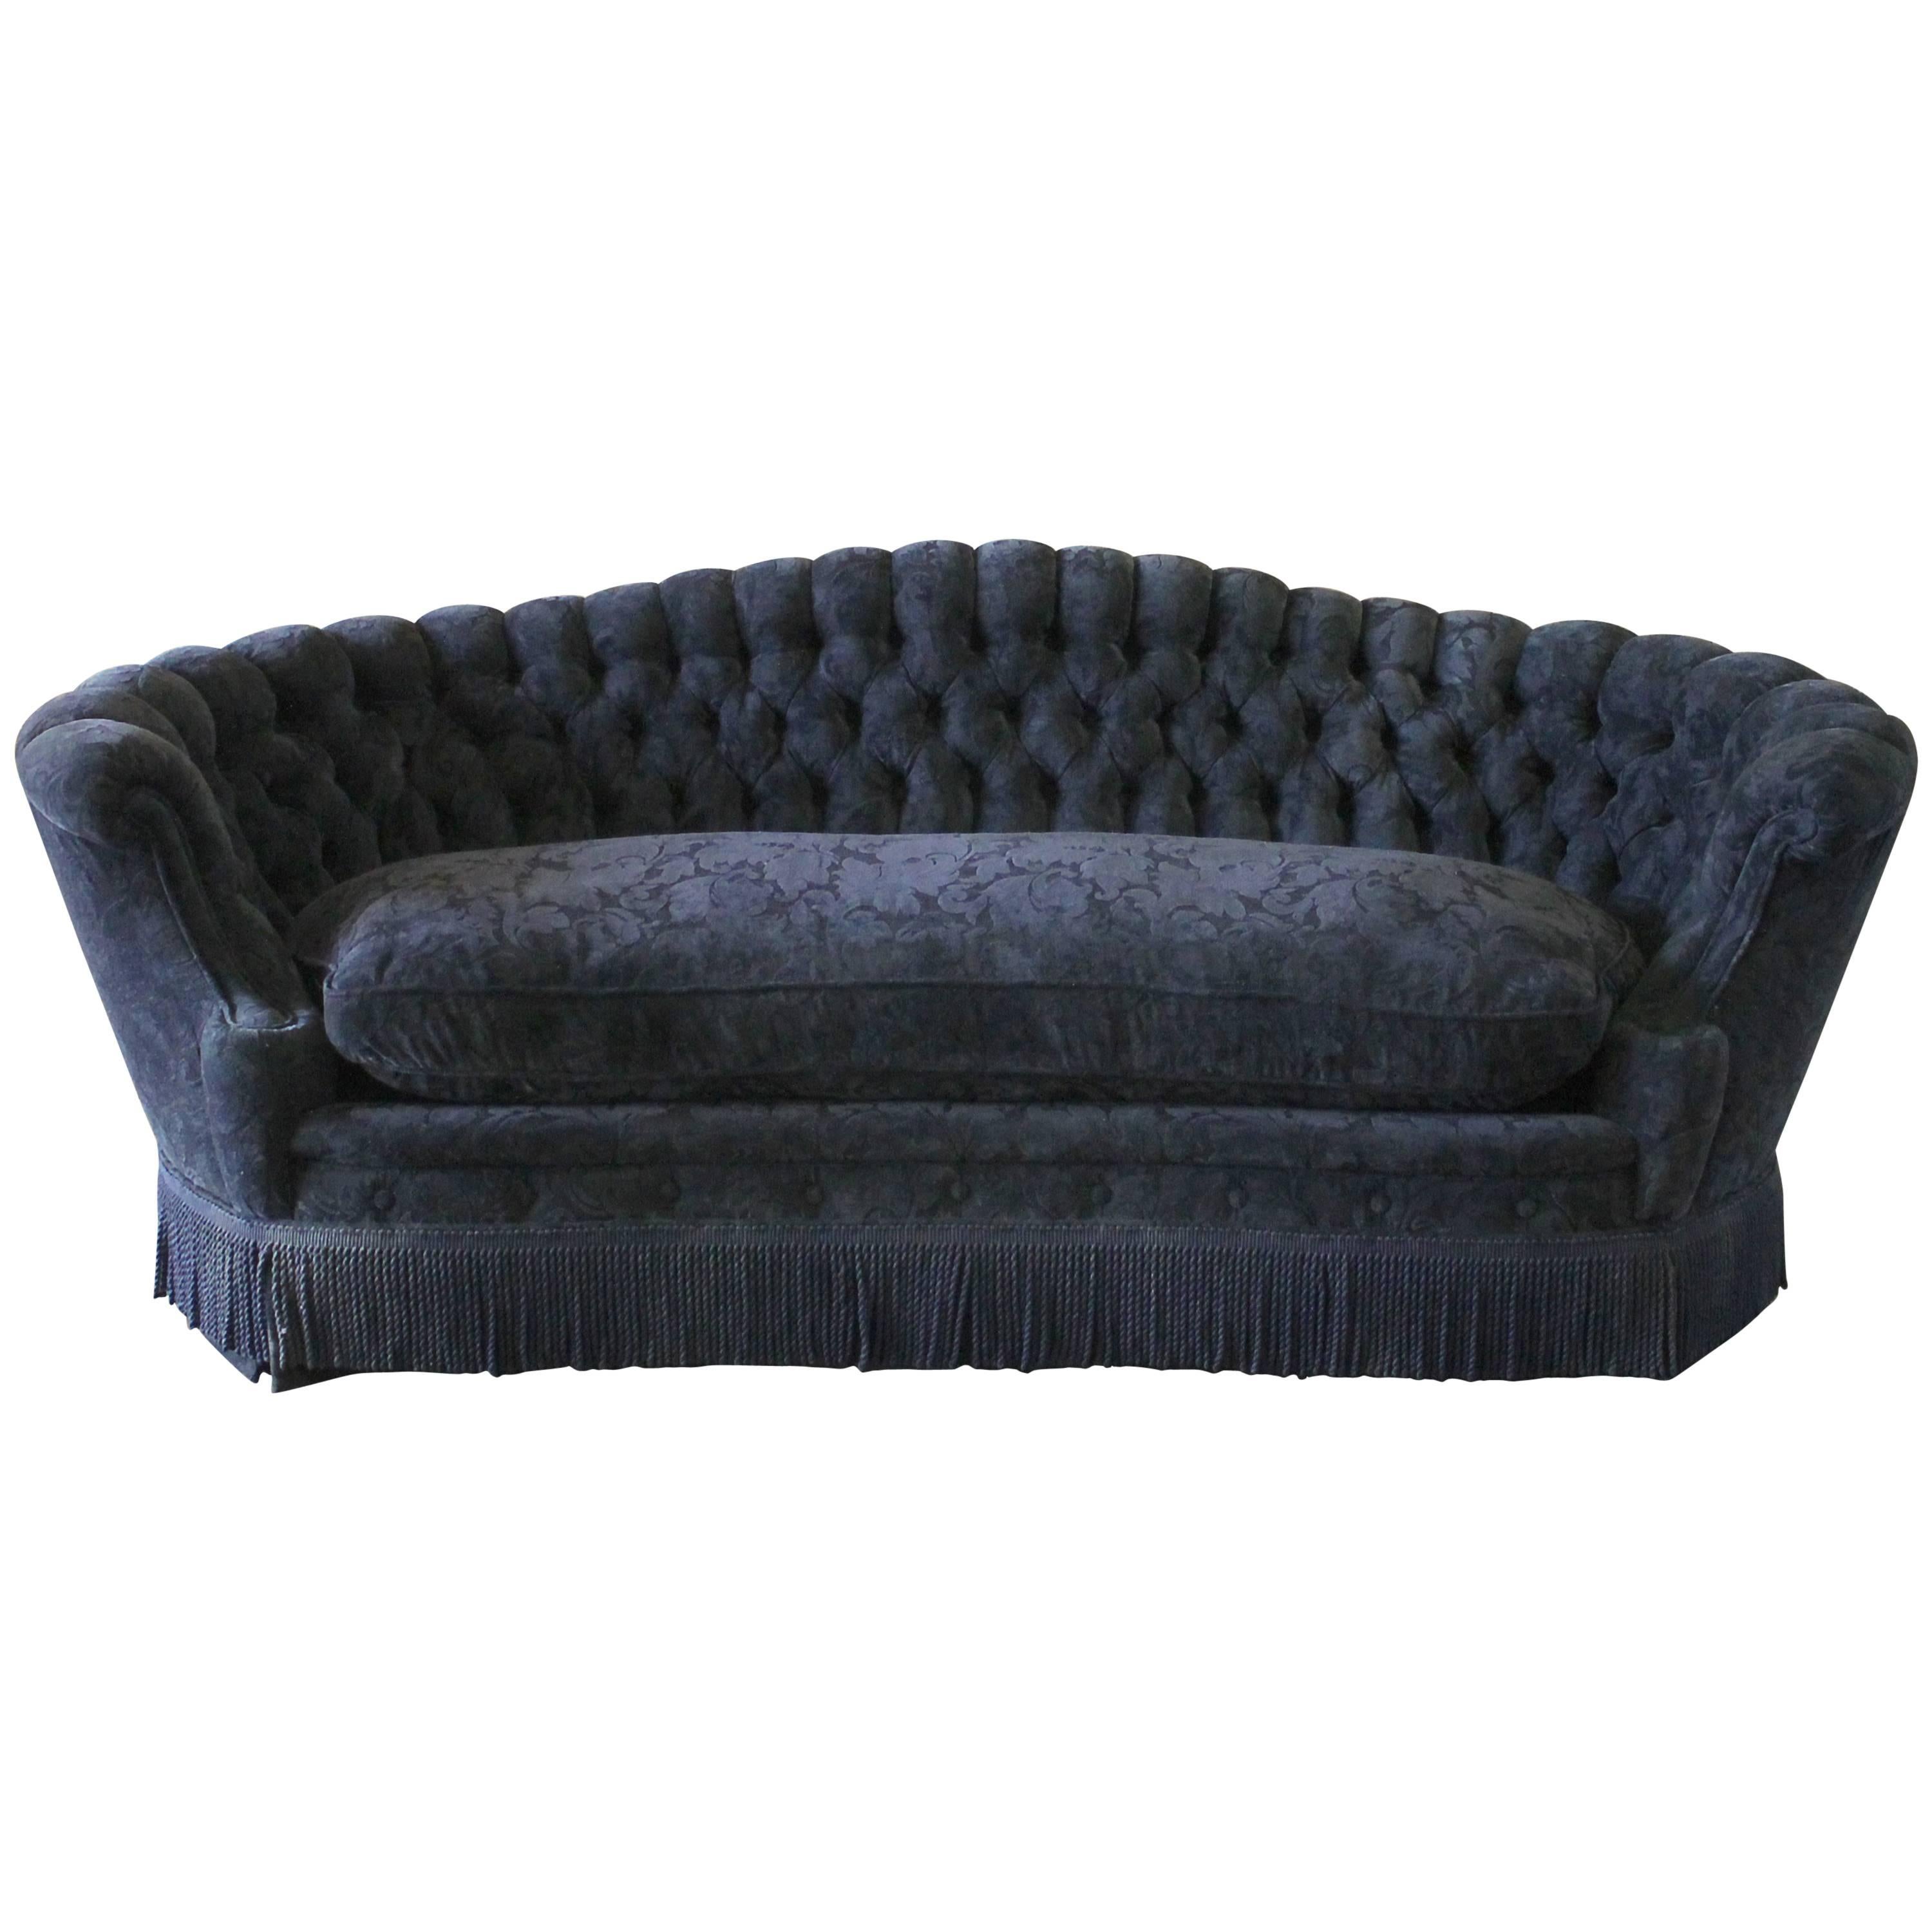 Vintage Button Tufted Victorian Style Sofa